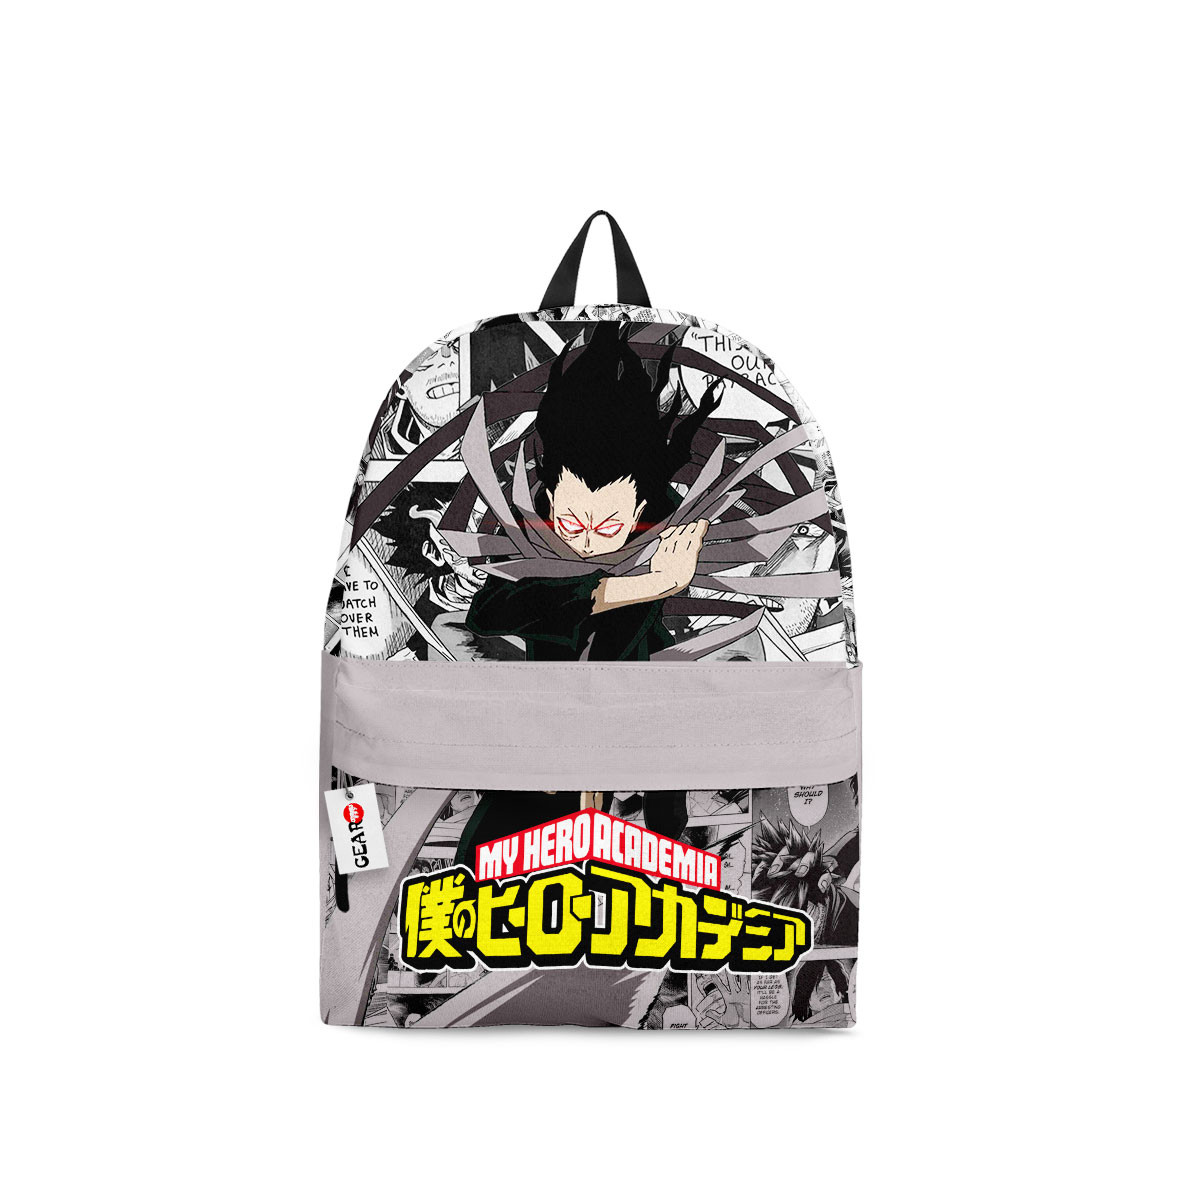 Latest Anime style products 250